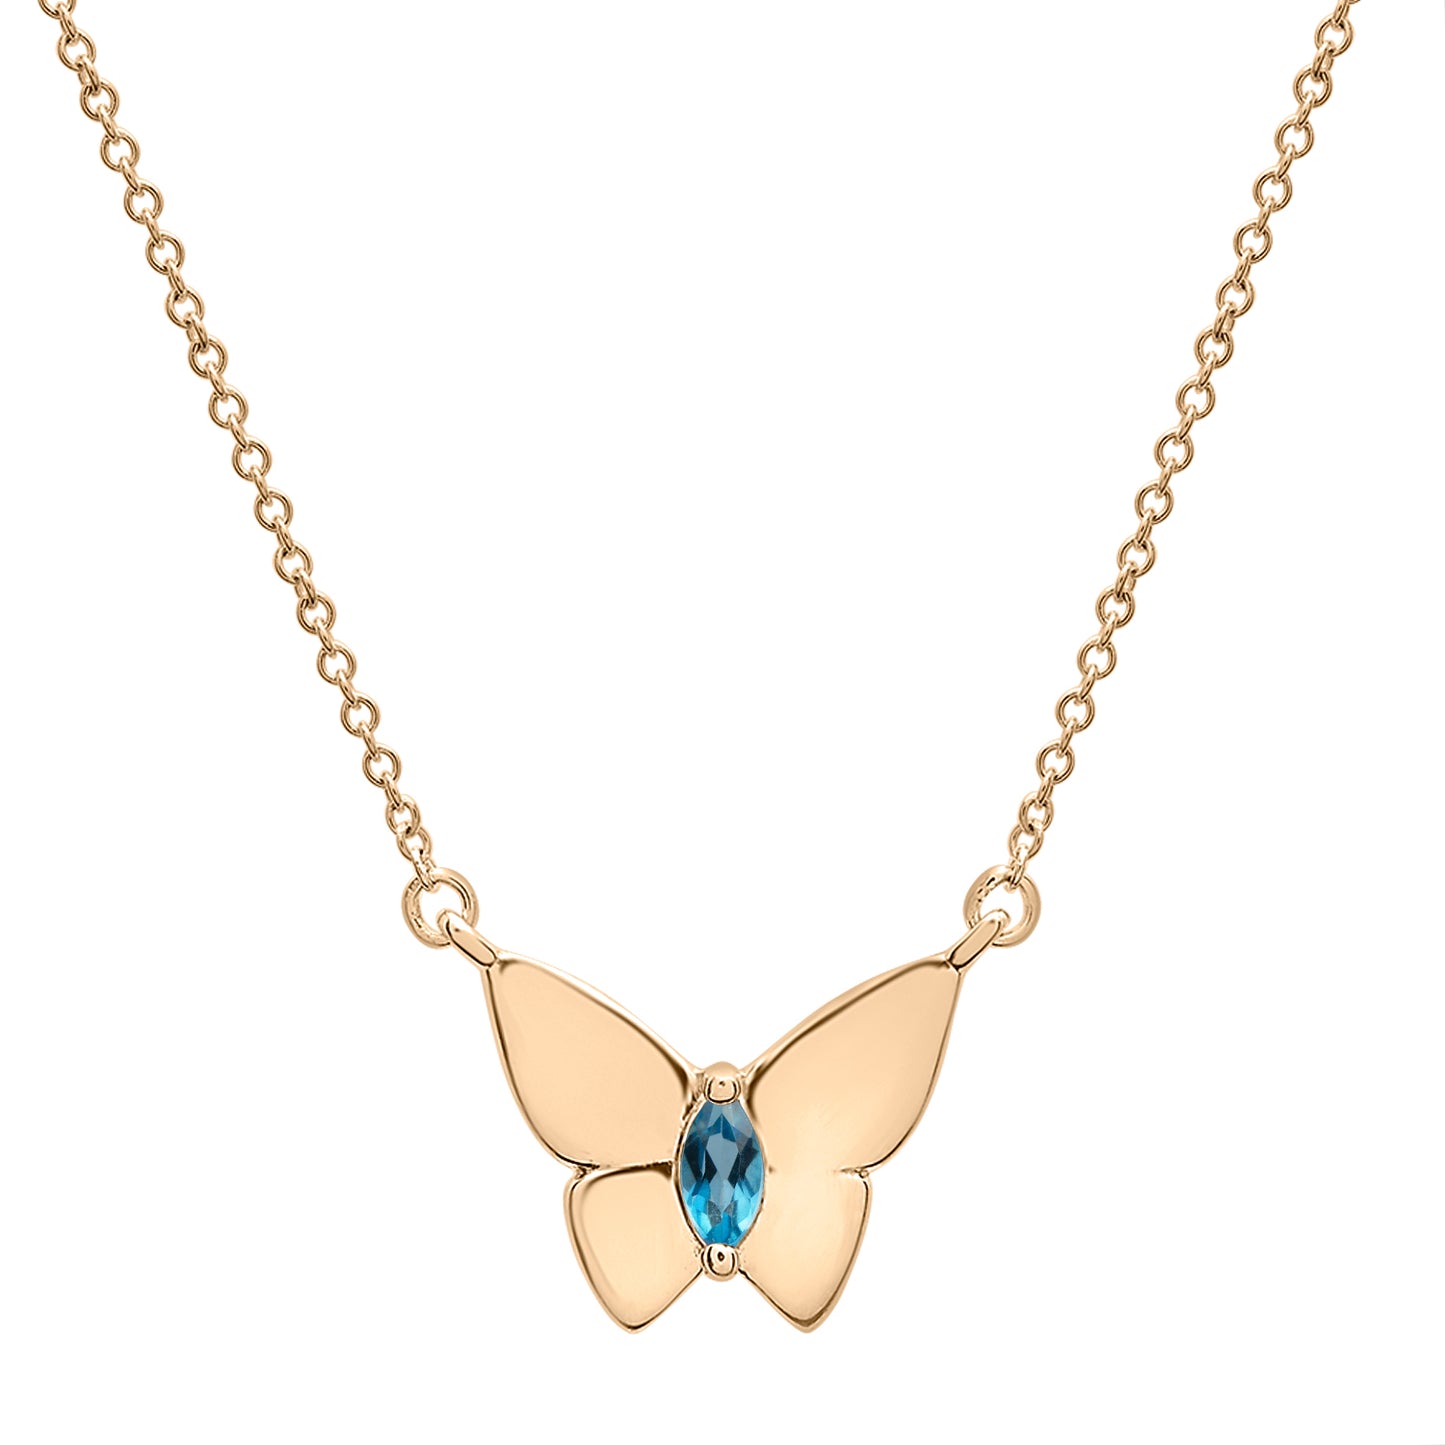 Butterfly Birthstone Necklace in Sky Blue Stone